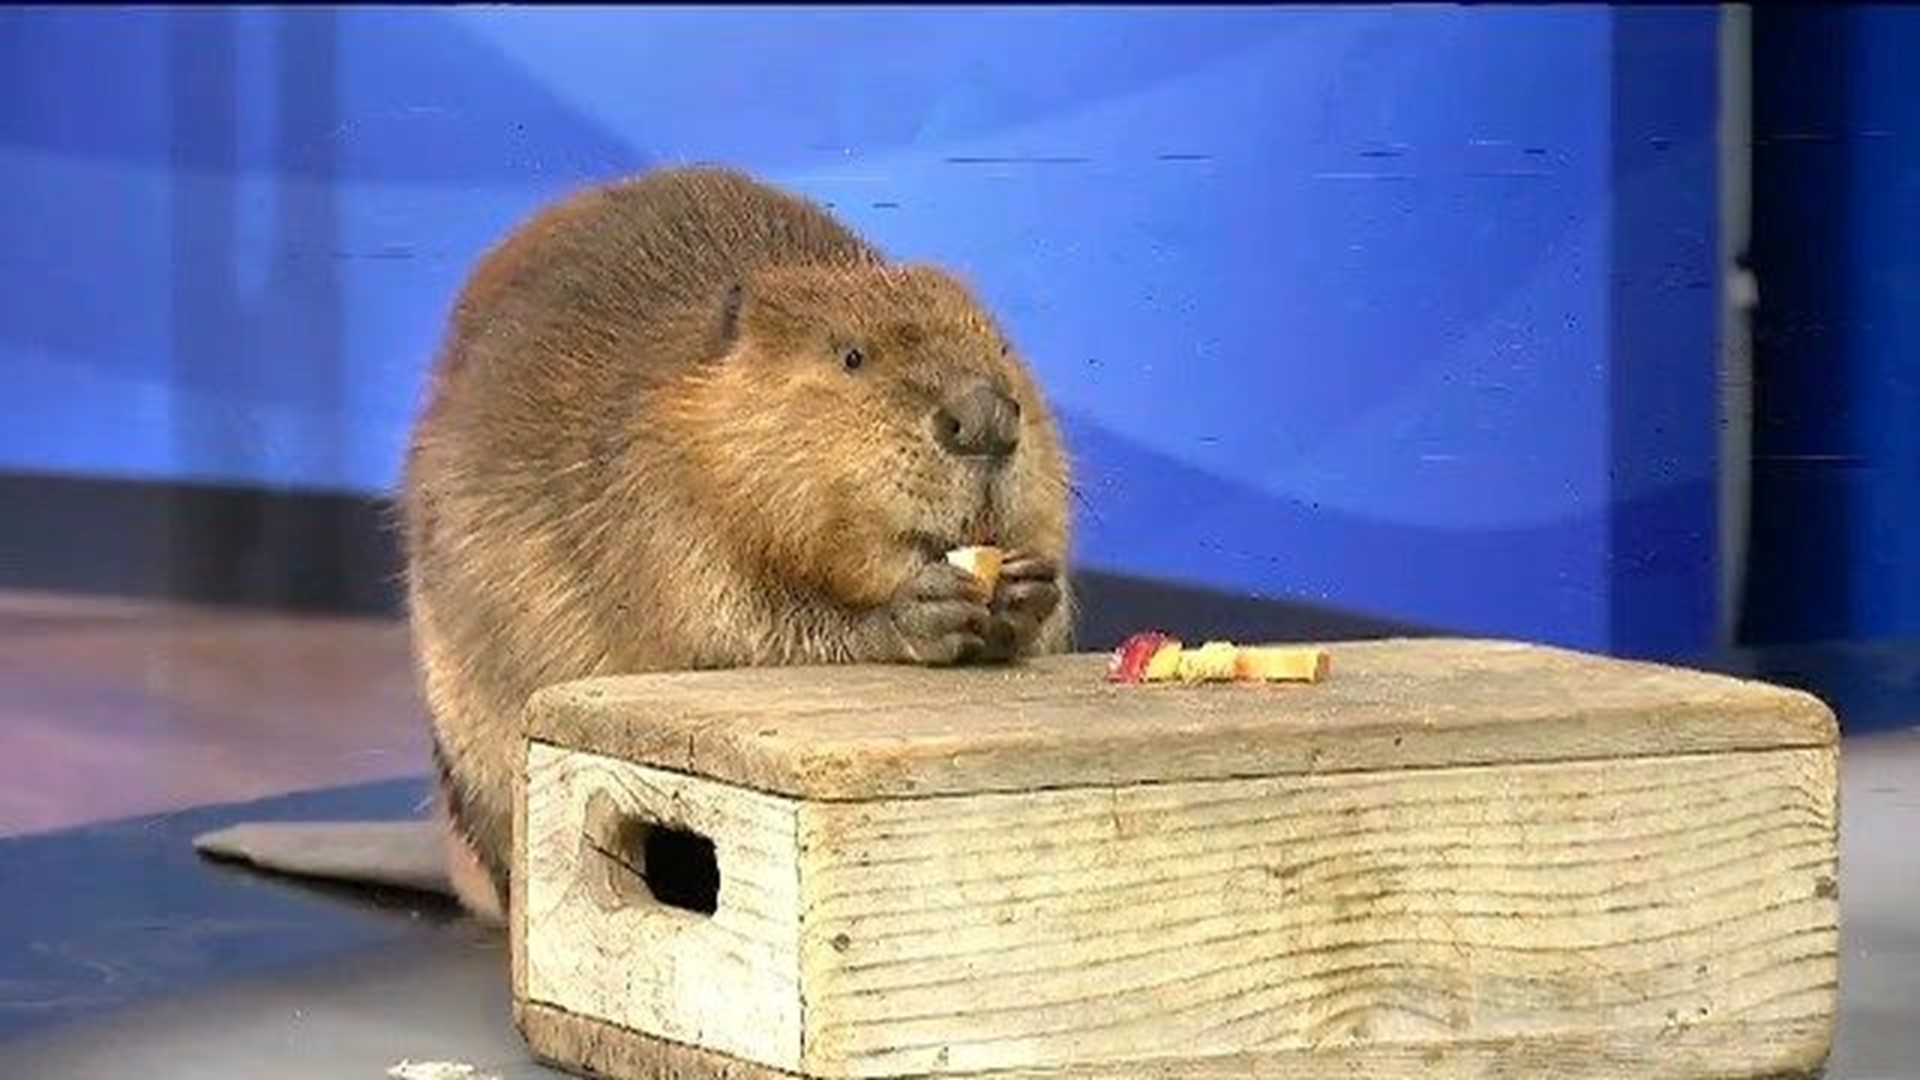 Justine Beaver stops by News 8 for Zoo Day cbs8 image